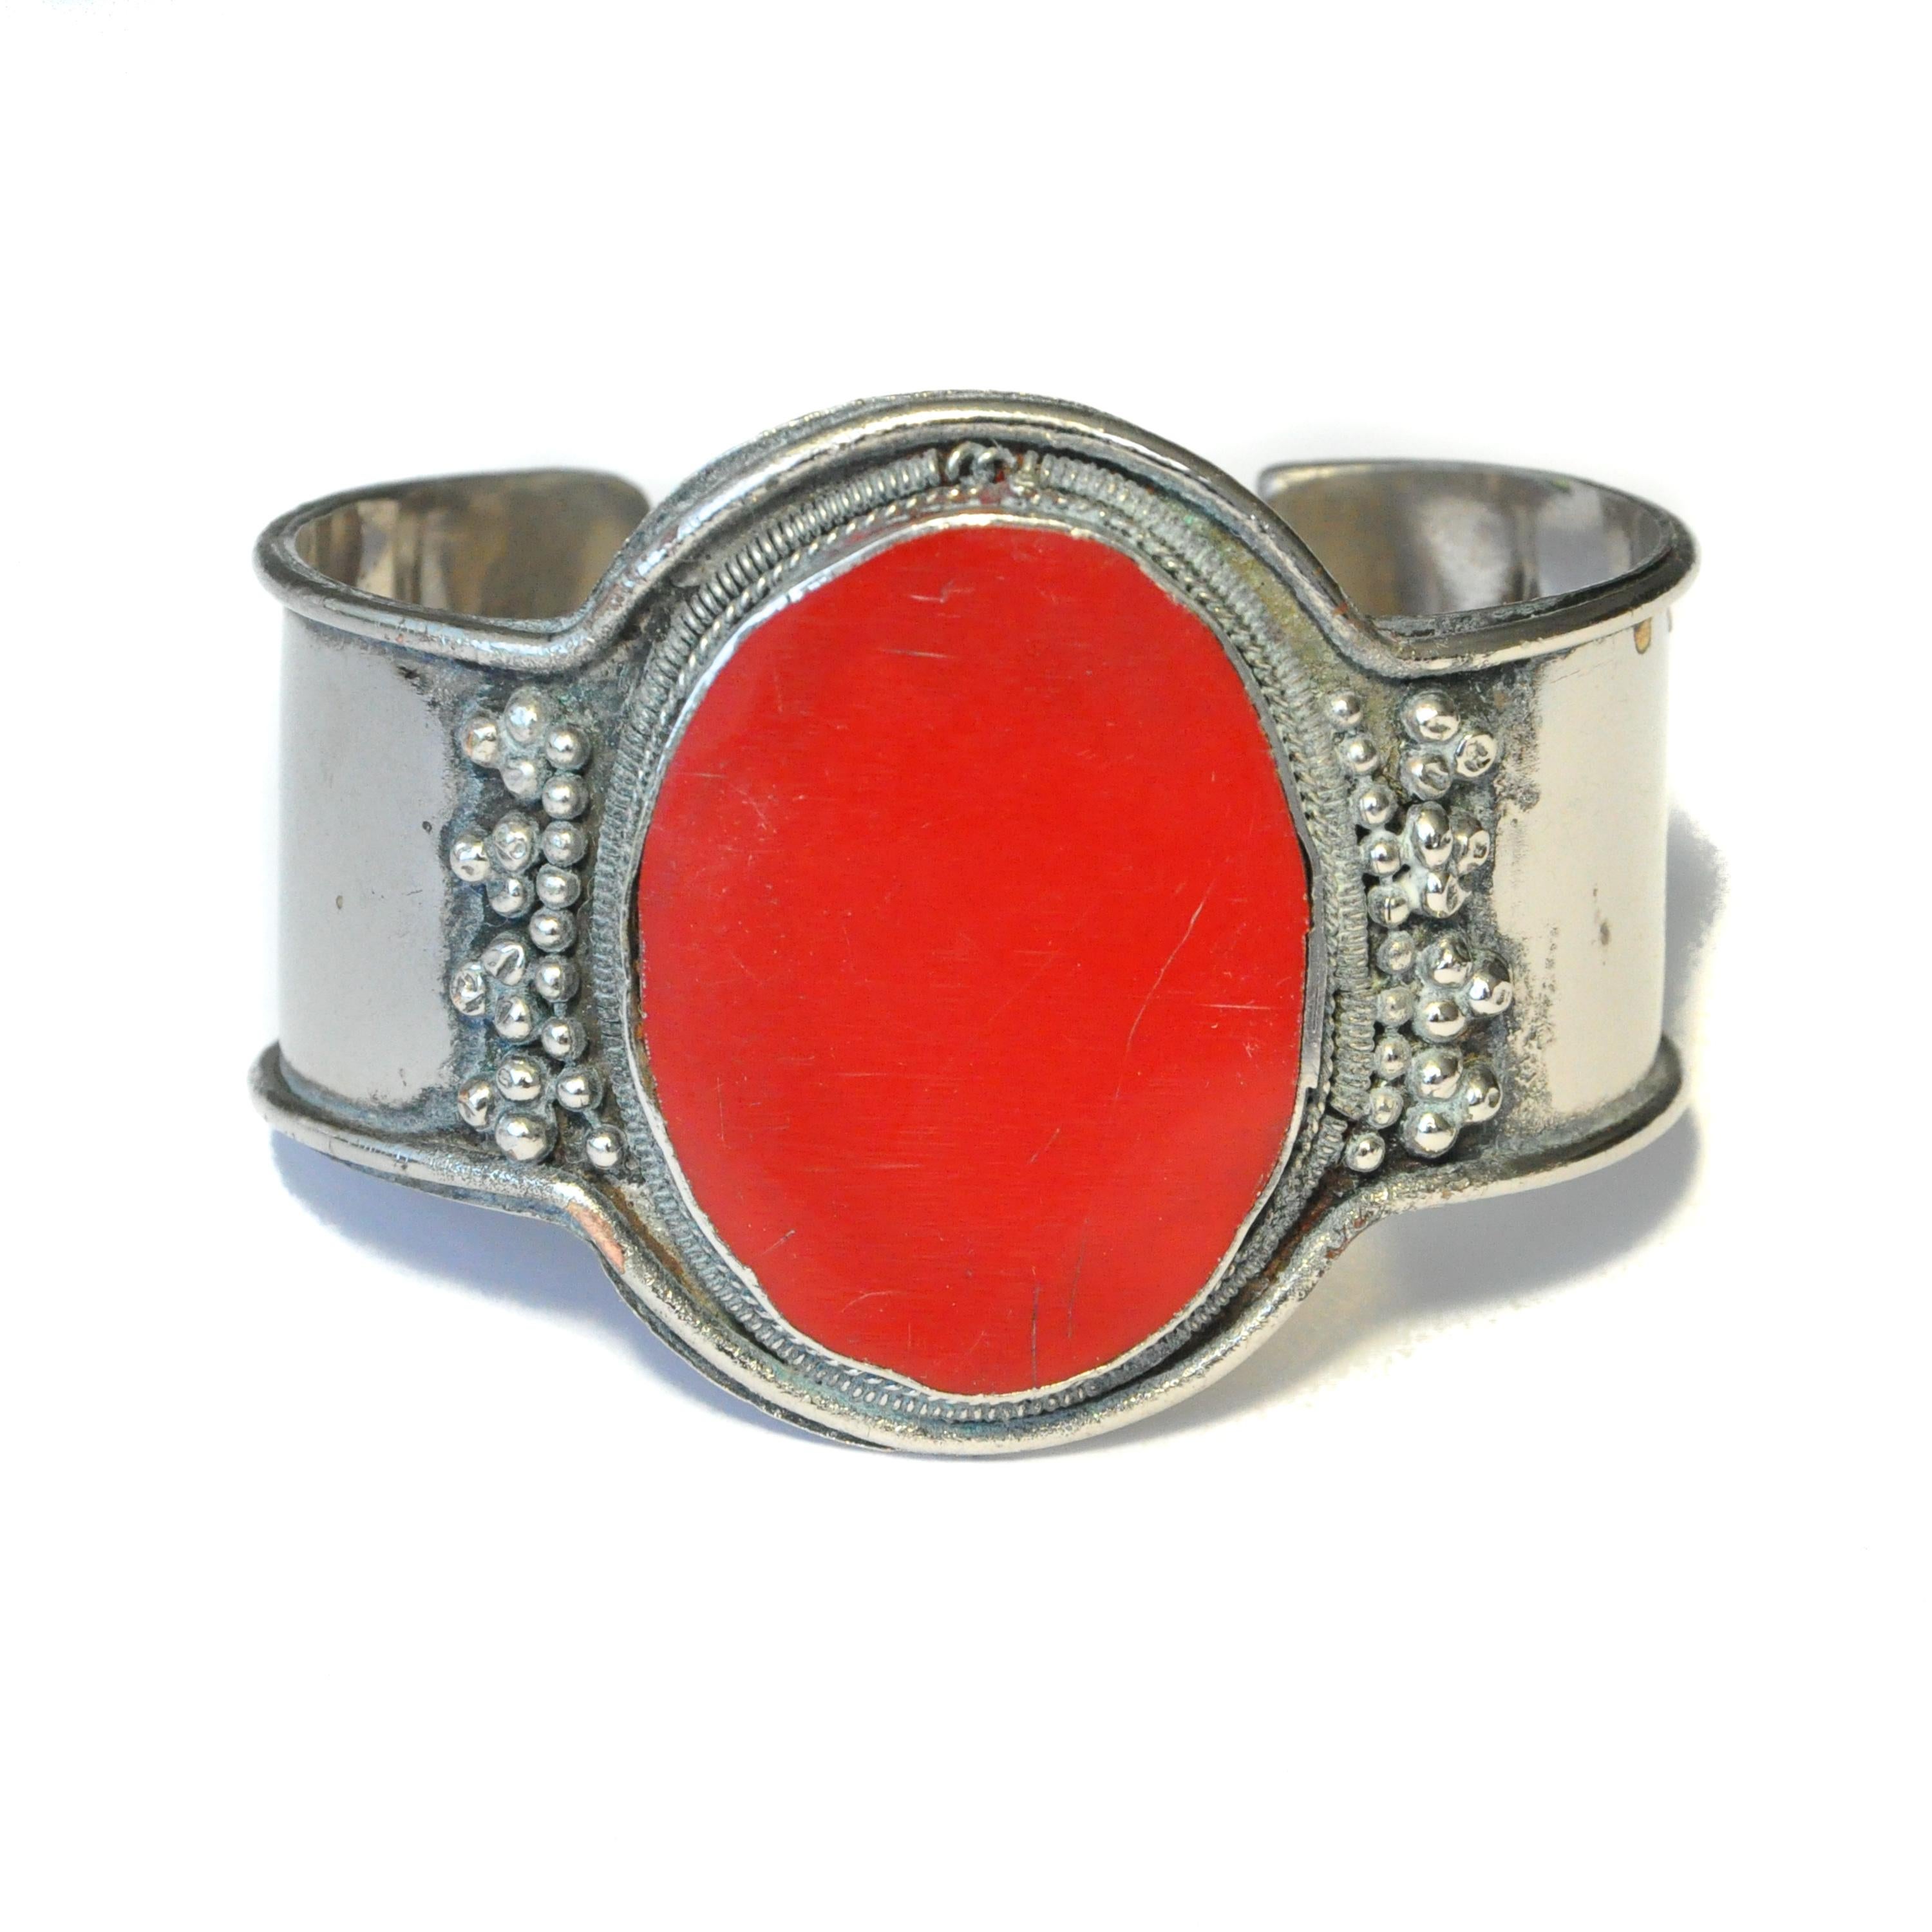 A Tibetan ethnic-style bracelet made of silver that has been fashioned into a solid silver bangle. The front of the bangle features a very large, oval chunky red stone that has been vertical inlaid. The silver has an upraised edge, at the front side